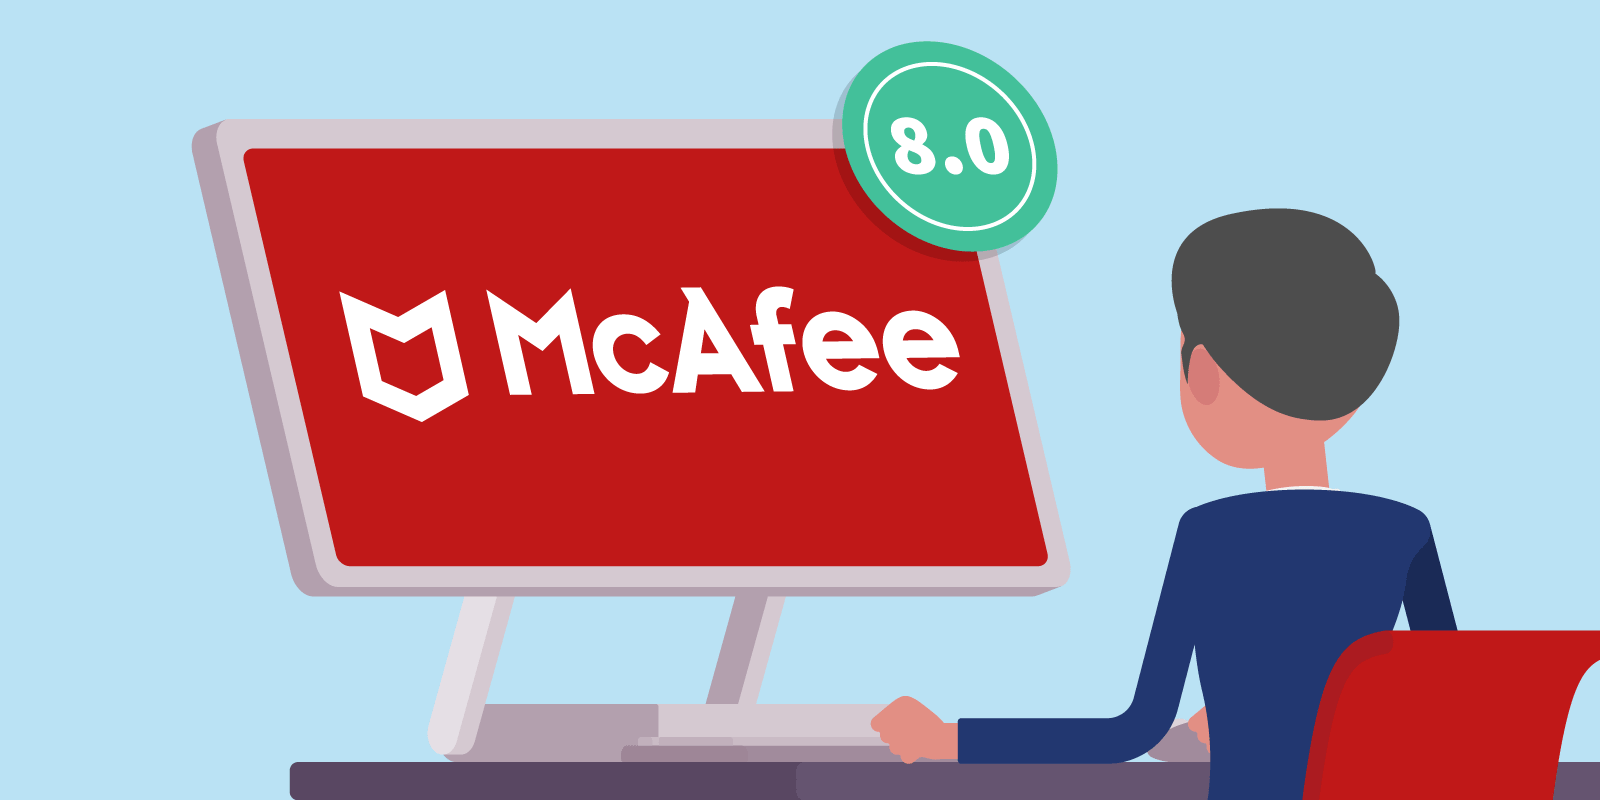 mcafee virusscan for mac review